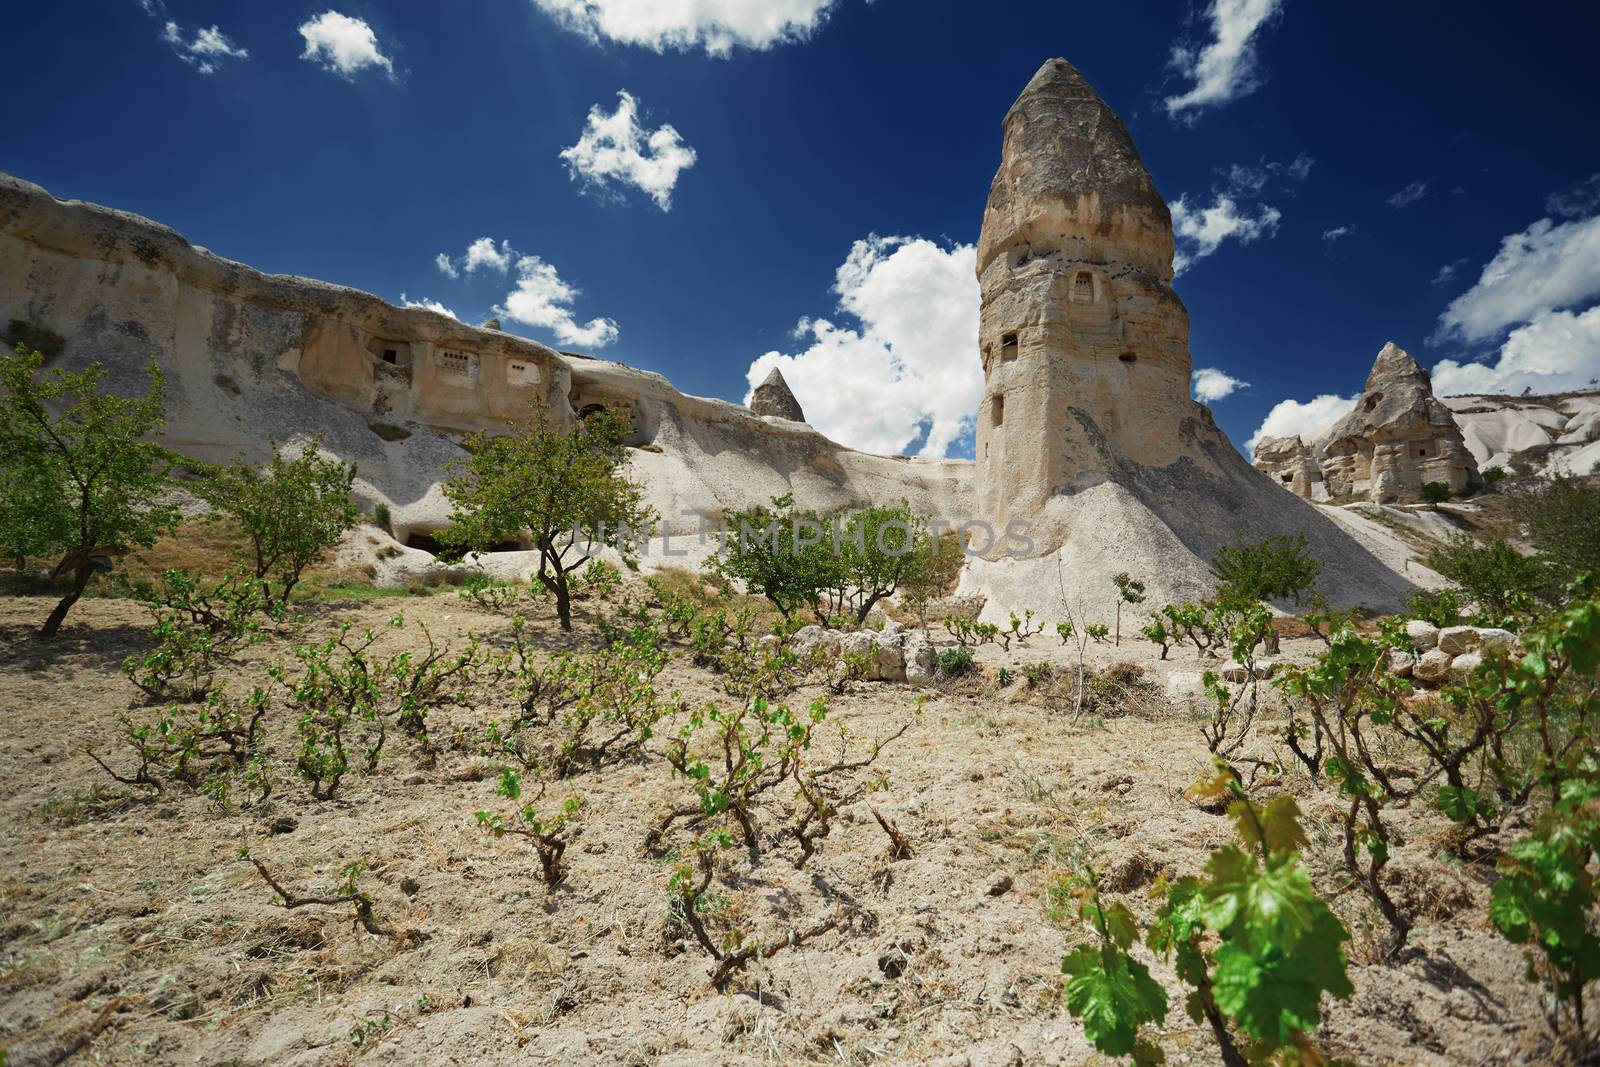 Wineyard at the geological rock formation in Cappadocia by Novic